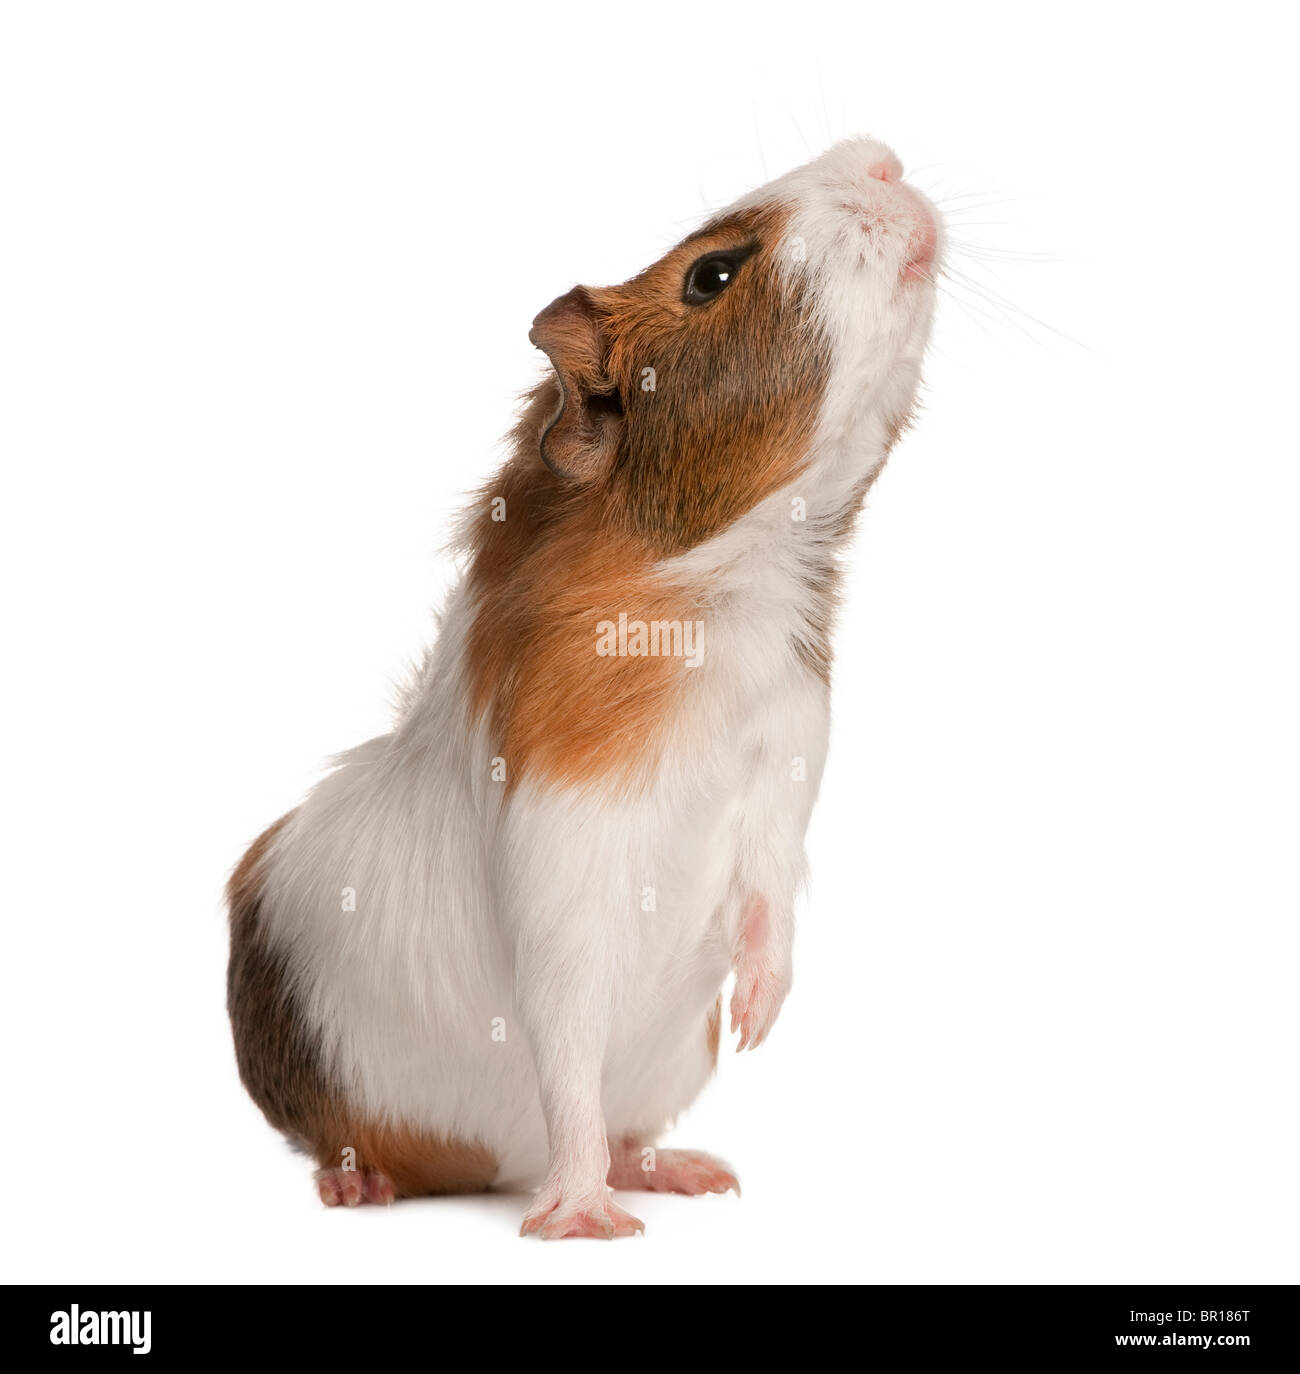 Guinea pig, Cavia porcellus, sniffing in front of white background Stock Photo